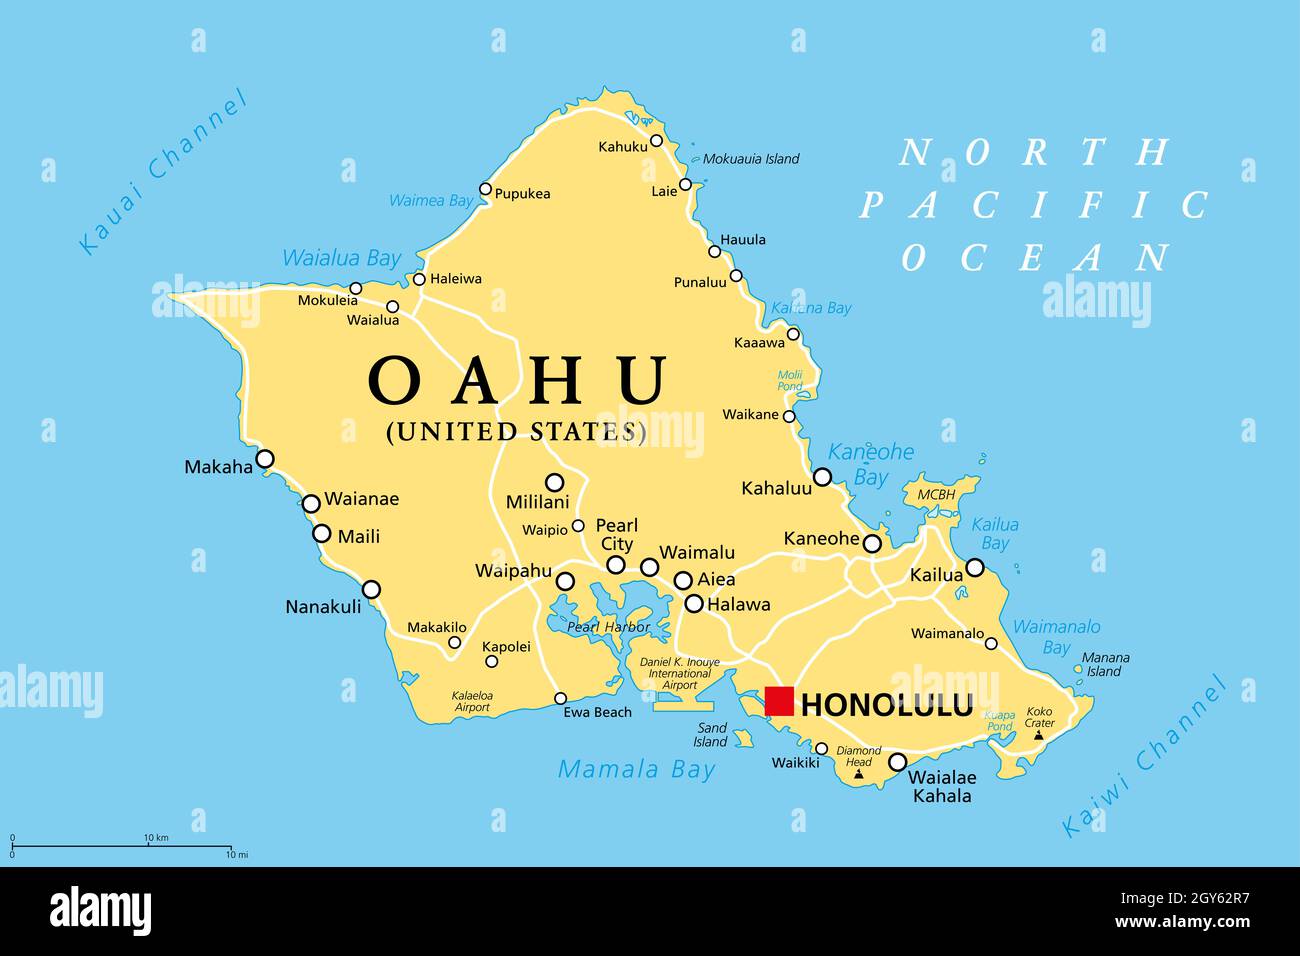 Oahu, Hawaii, political map with capital Honolulu. Part of the Hawaiian Islands and Hawaii, a state of the United States in the North Pacific Ocean. Stock Photo